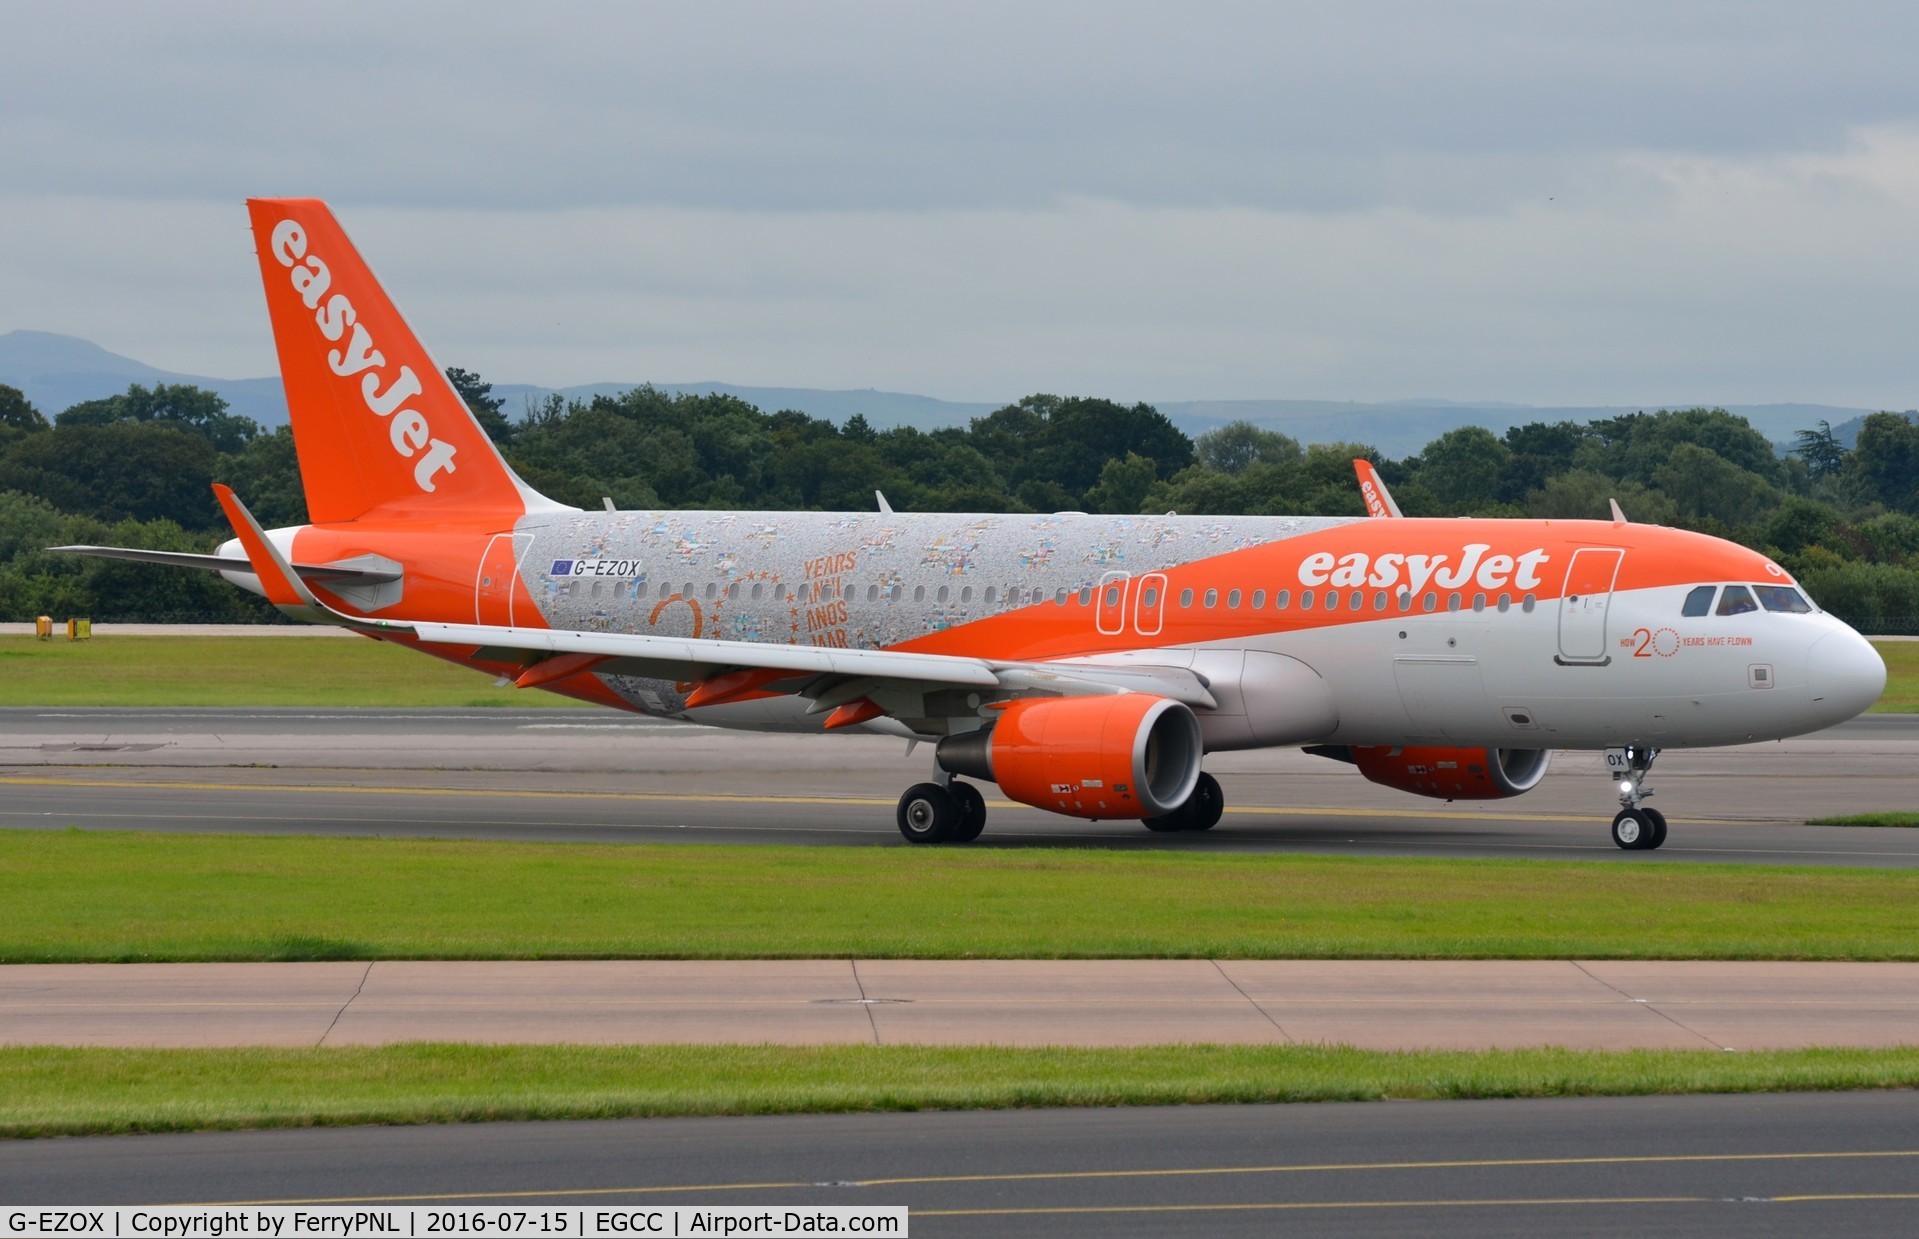 G-EZOX, 2015 Airbus A320-214 C/N 6837, Easyjet A320 in special colors.